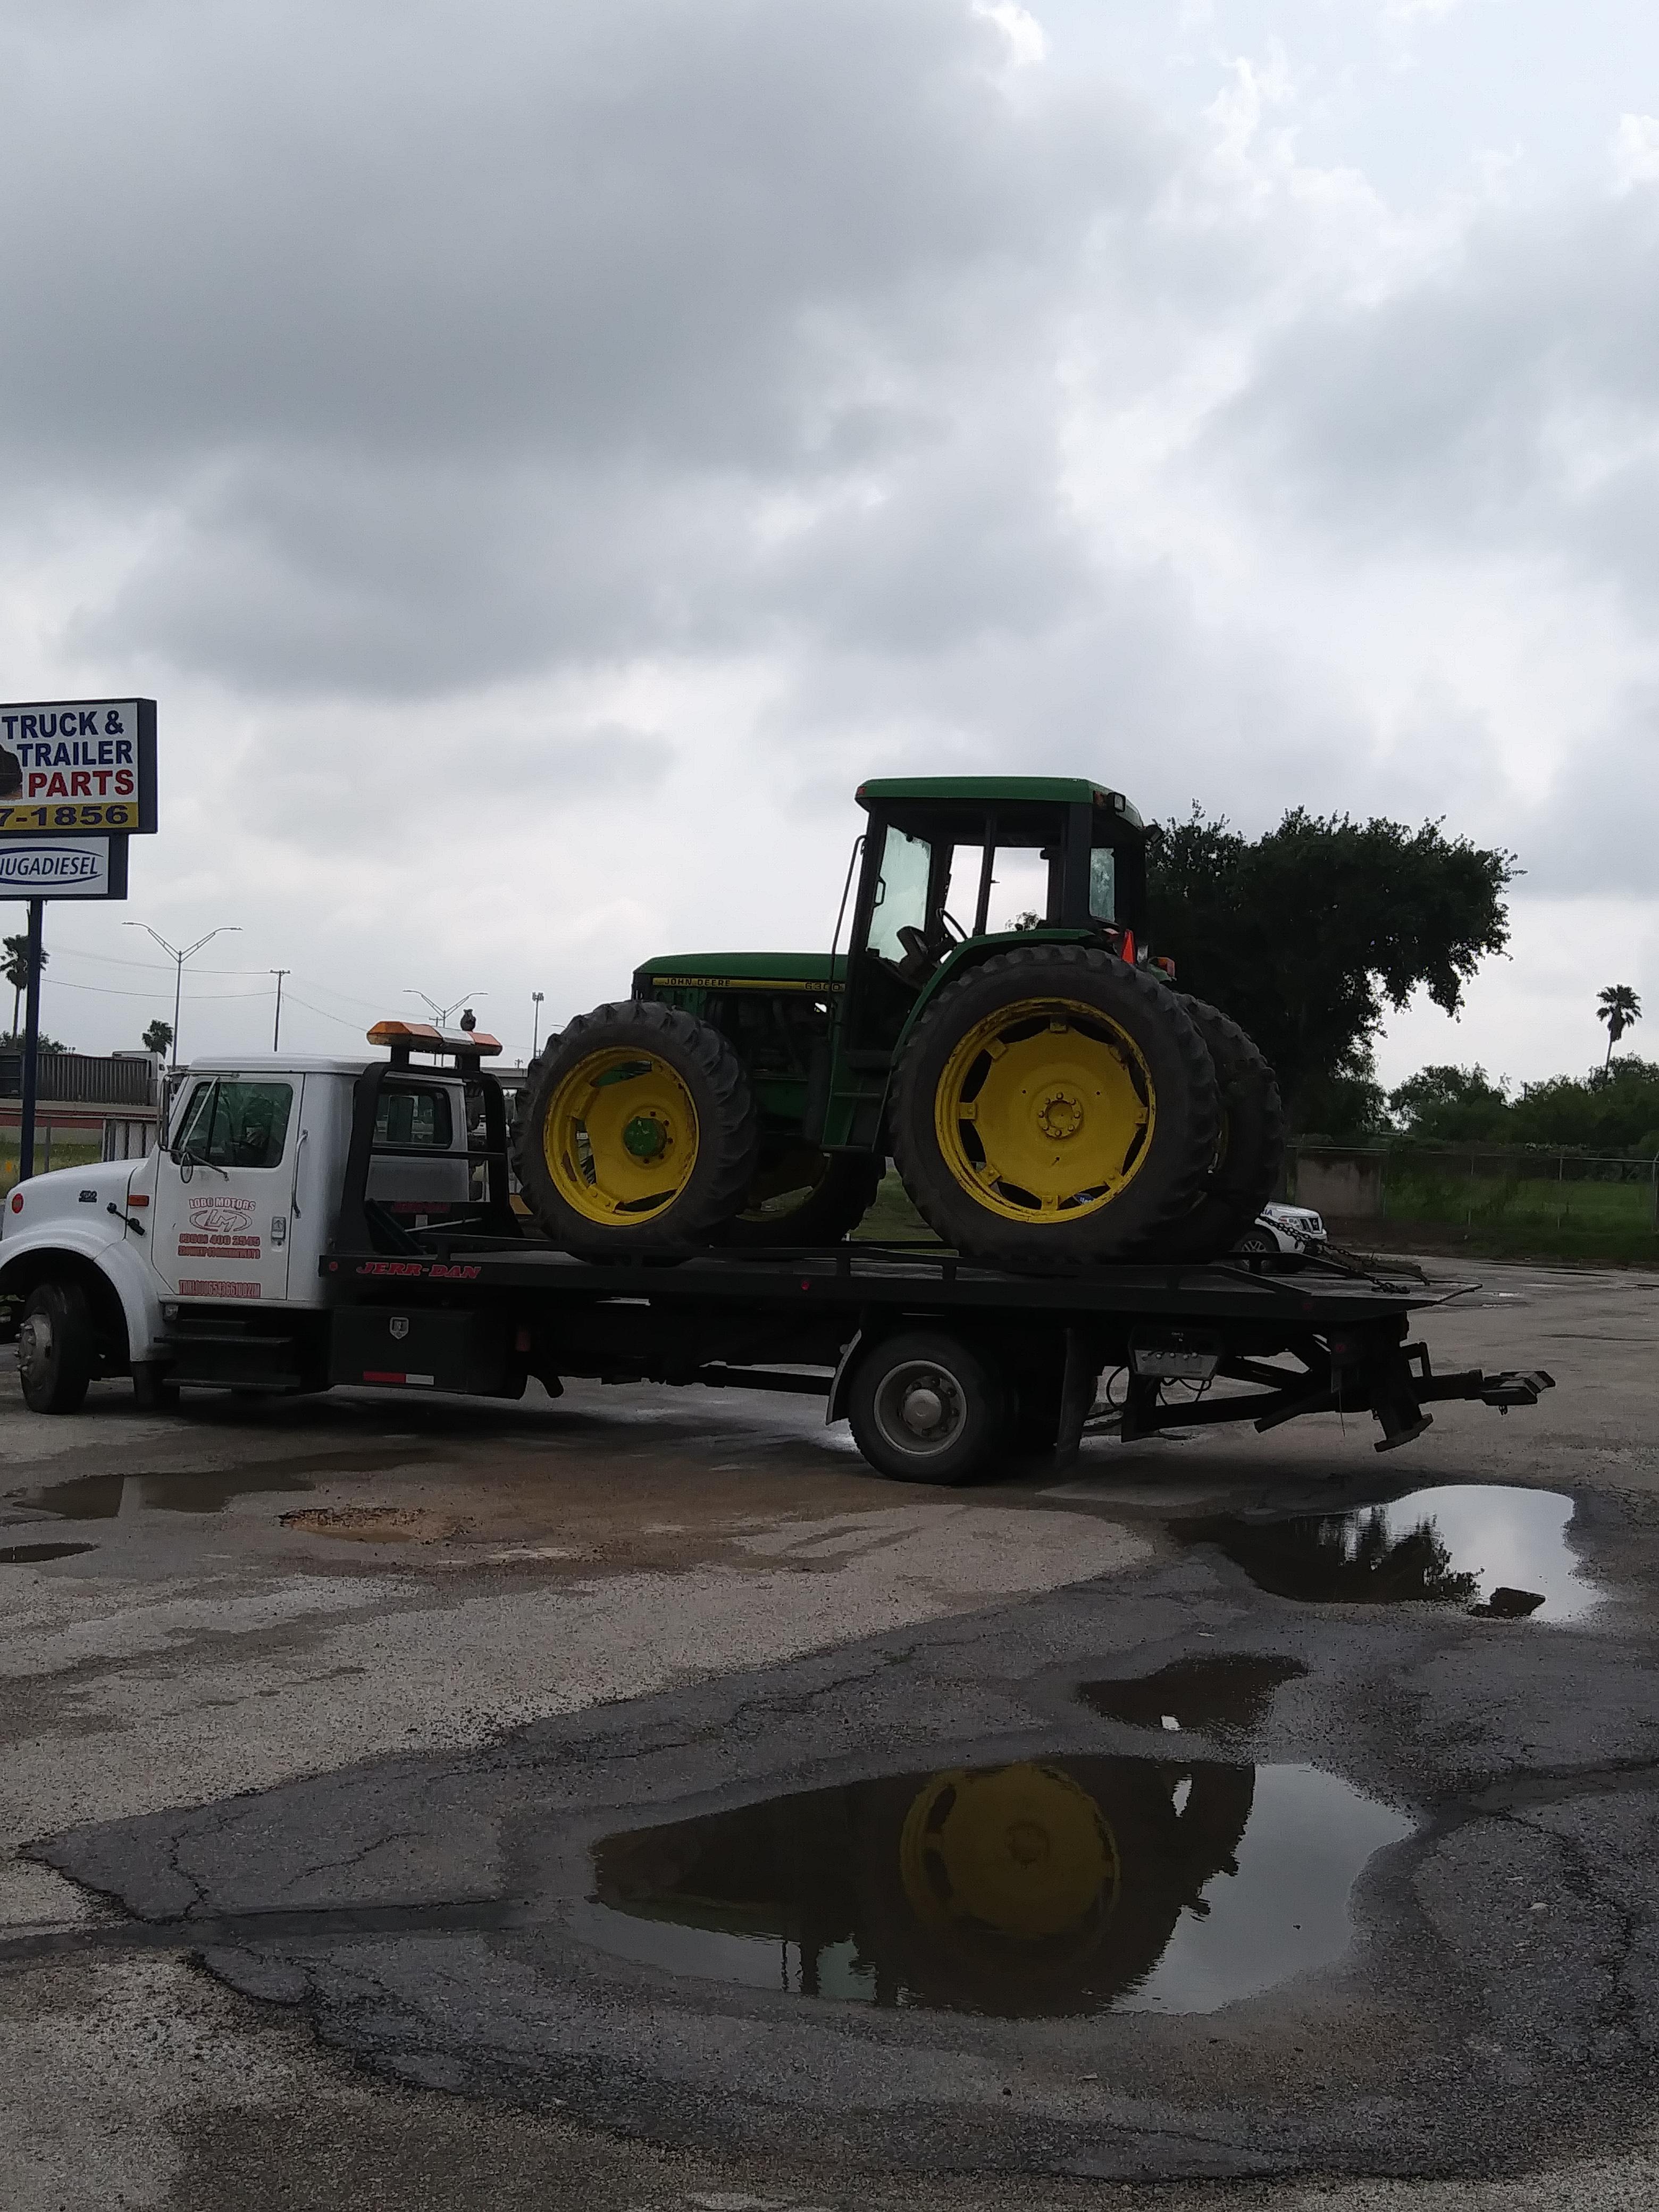 Stealth Auto Recovery is a fast, friendly, affordable towing and recovery company serving the greate Stealth Auto Recovery Palmview (956)325-2847